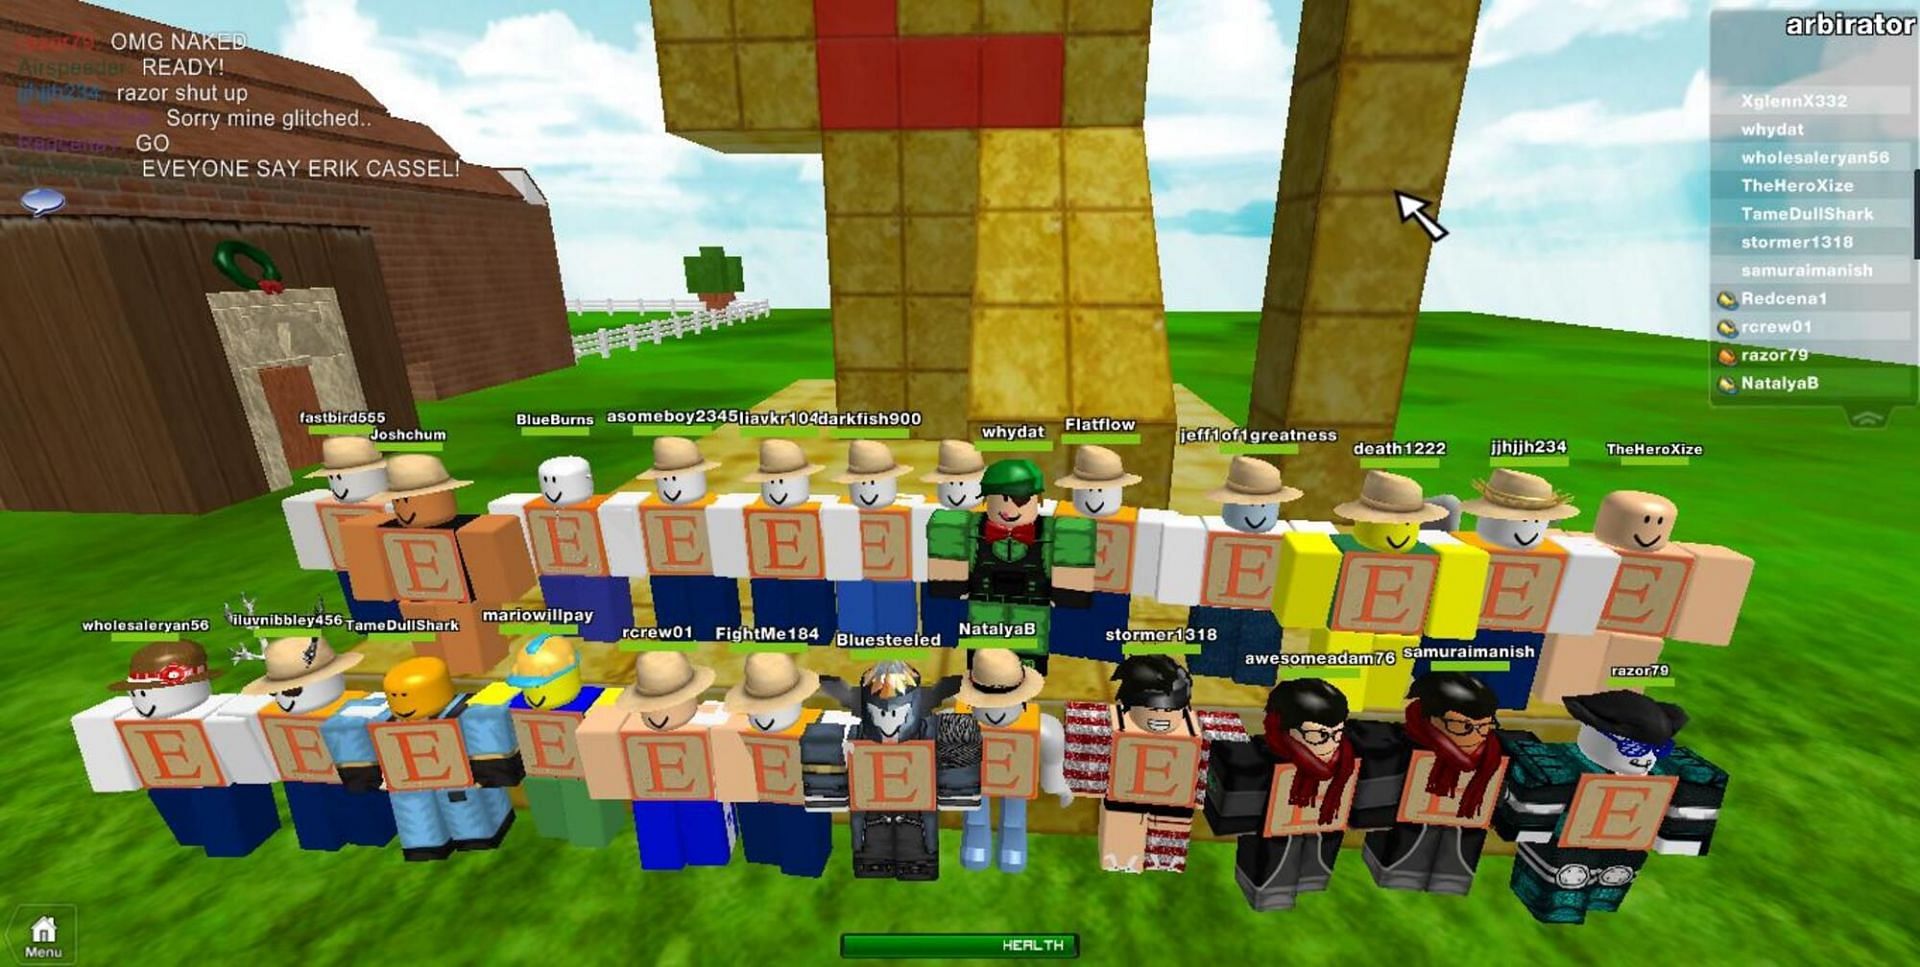 Who created Roblox? Exploring developer details and more